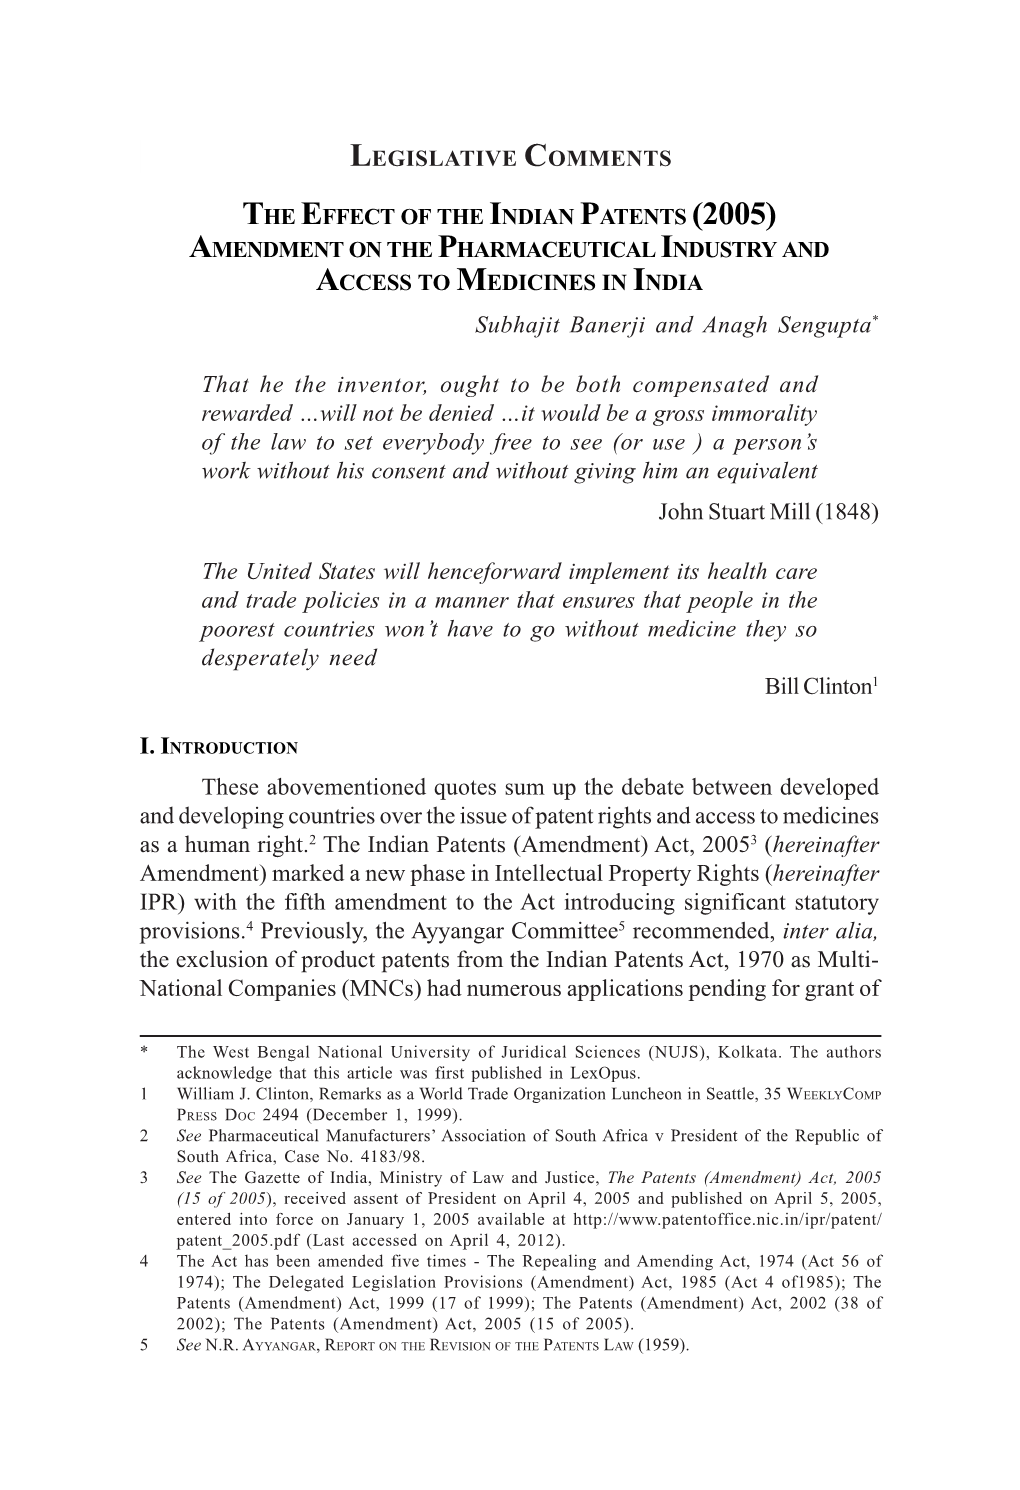 AMENDMENT on the PHARMACEUTICAL INDUSTRY and ACCESS to MEDICINES in INDIA Subhajit Banerji and Anagh Sengupta*